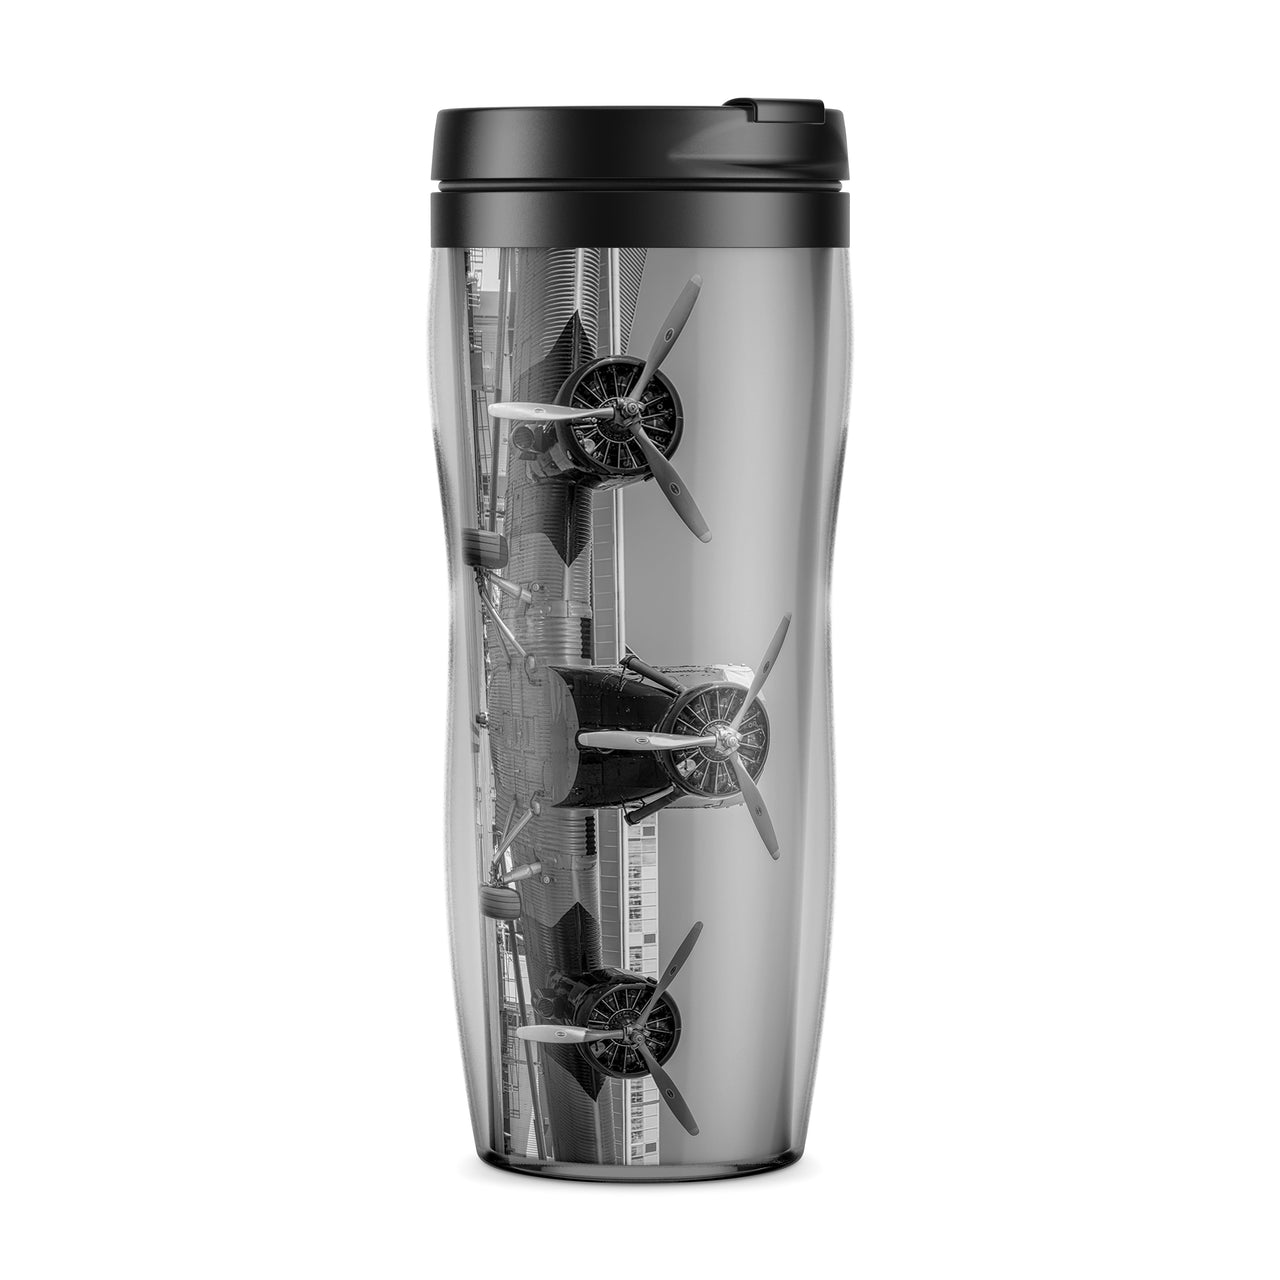 Face to Face to 3 Engine Old Airplane Designed Travel Mugs